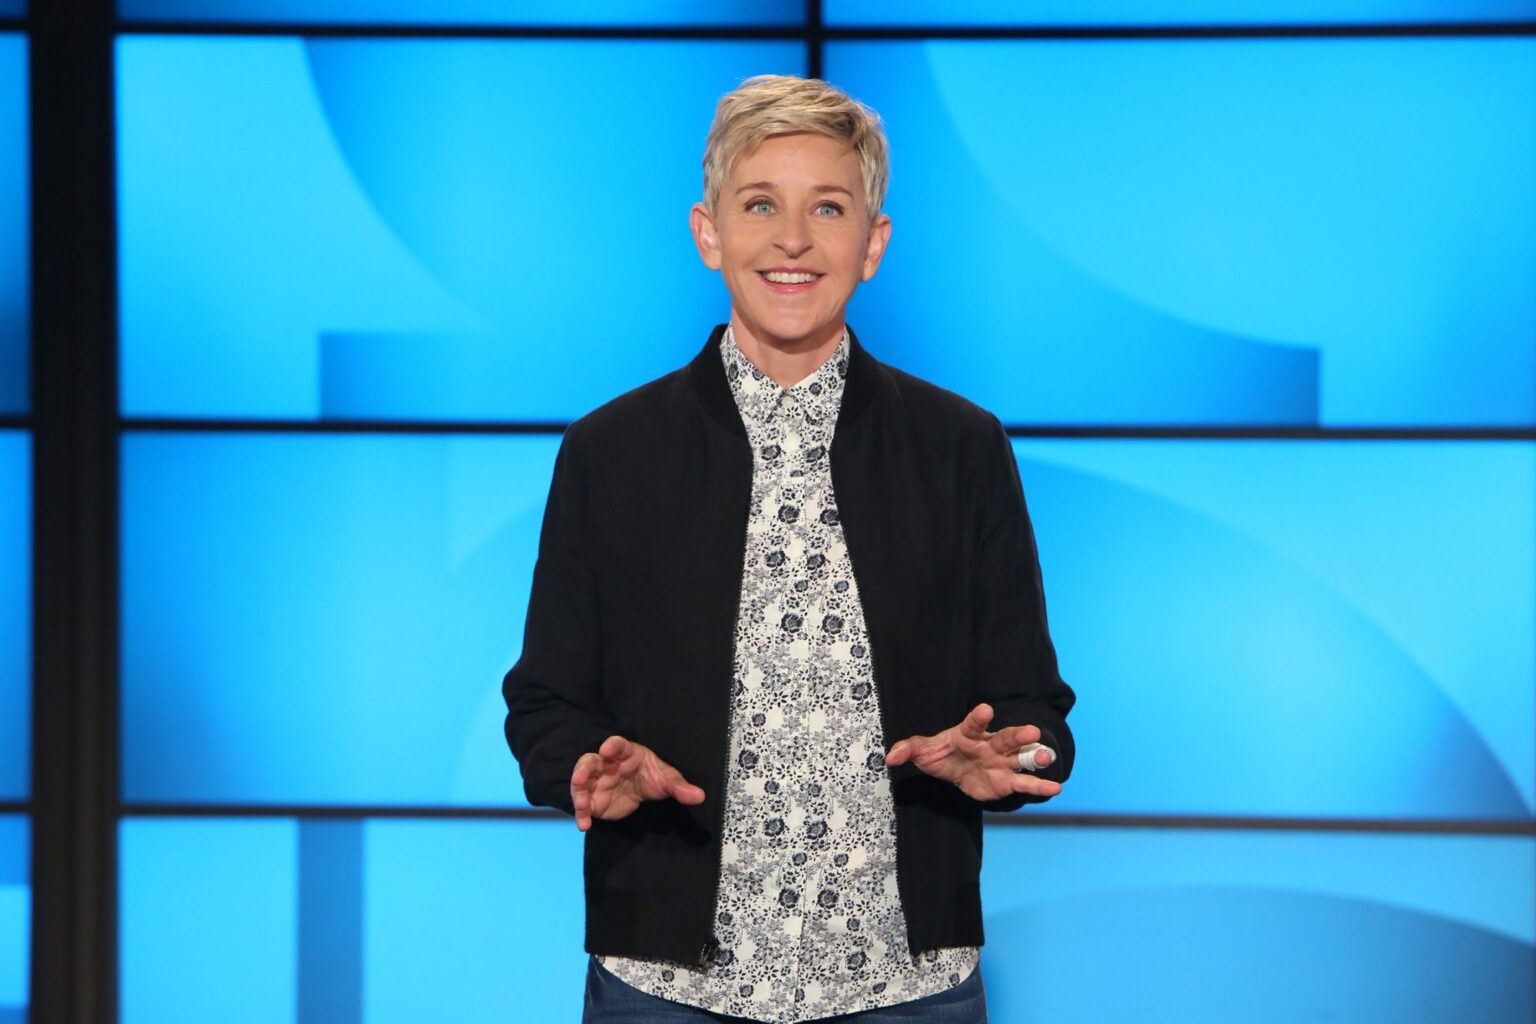 Looking for proof 'The Ellen DeGeneres Show' gives its staffers kindness too? Check out the time Ellen hired this staff member while on the air.